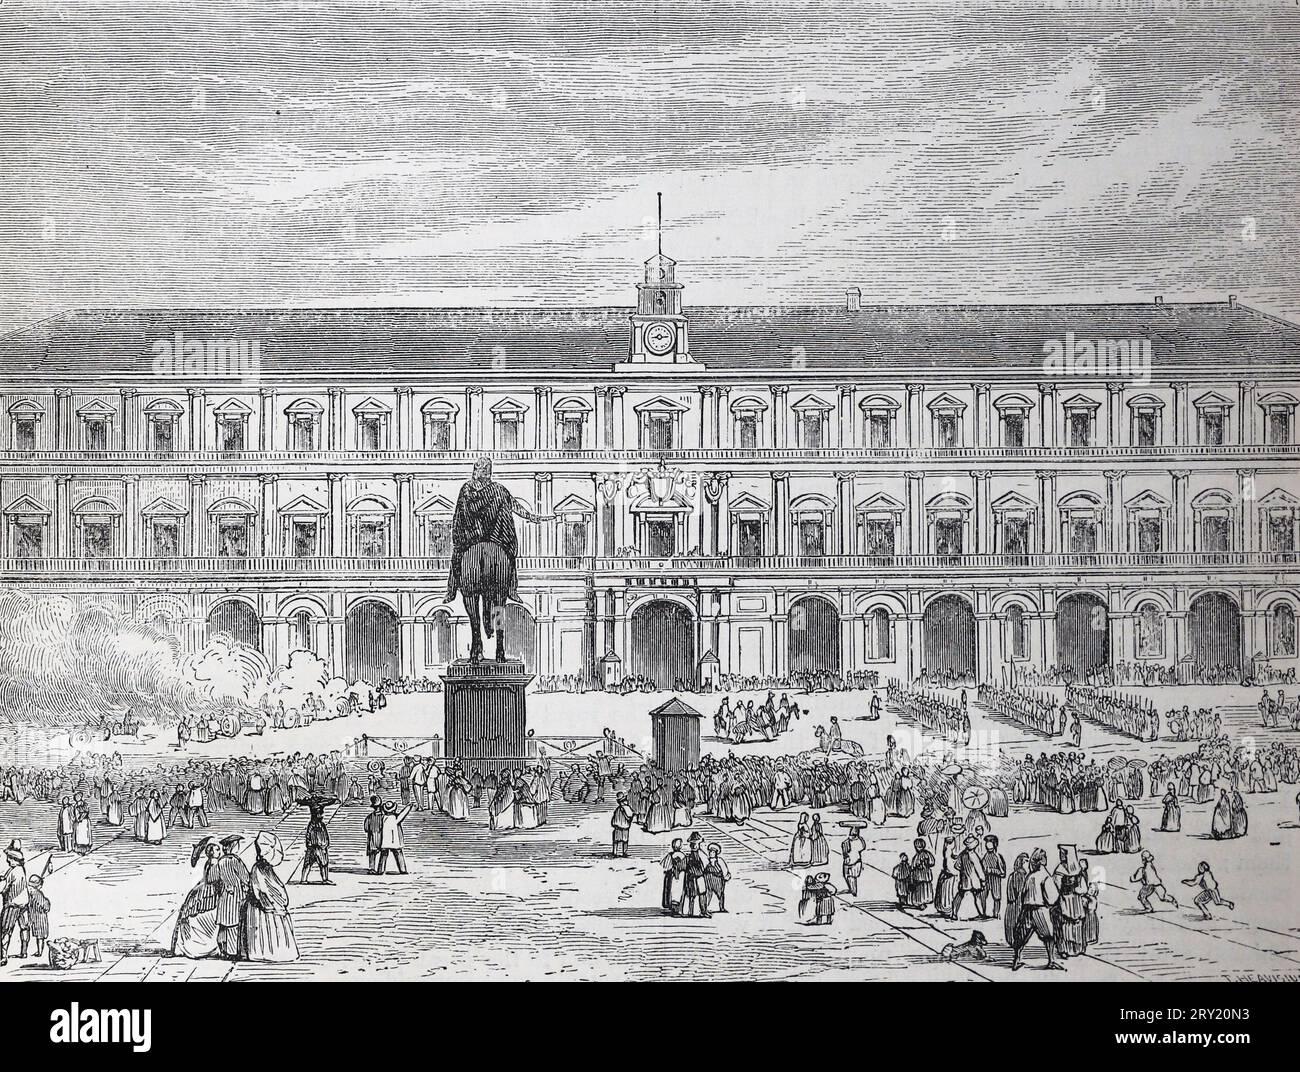 The Palace at Naples, Italy; 1860. Black and White Illustration Stock Photo